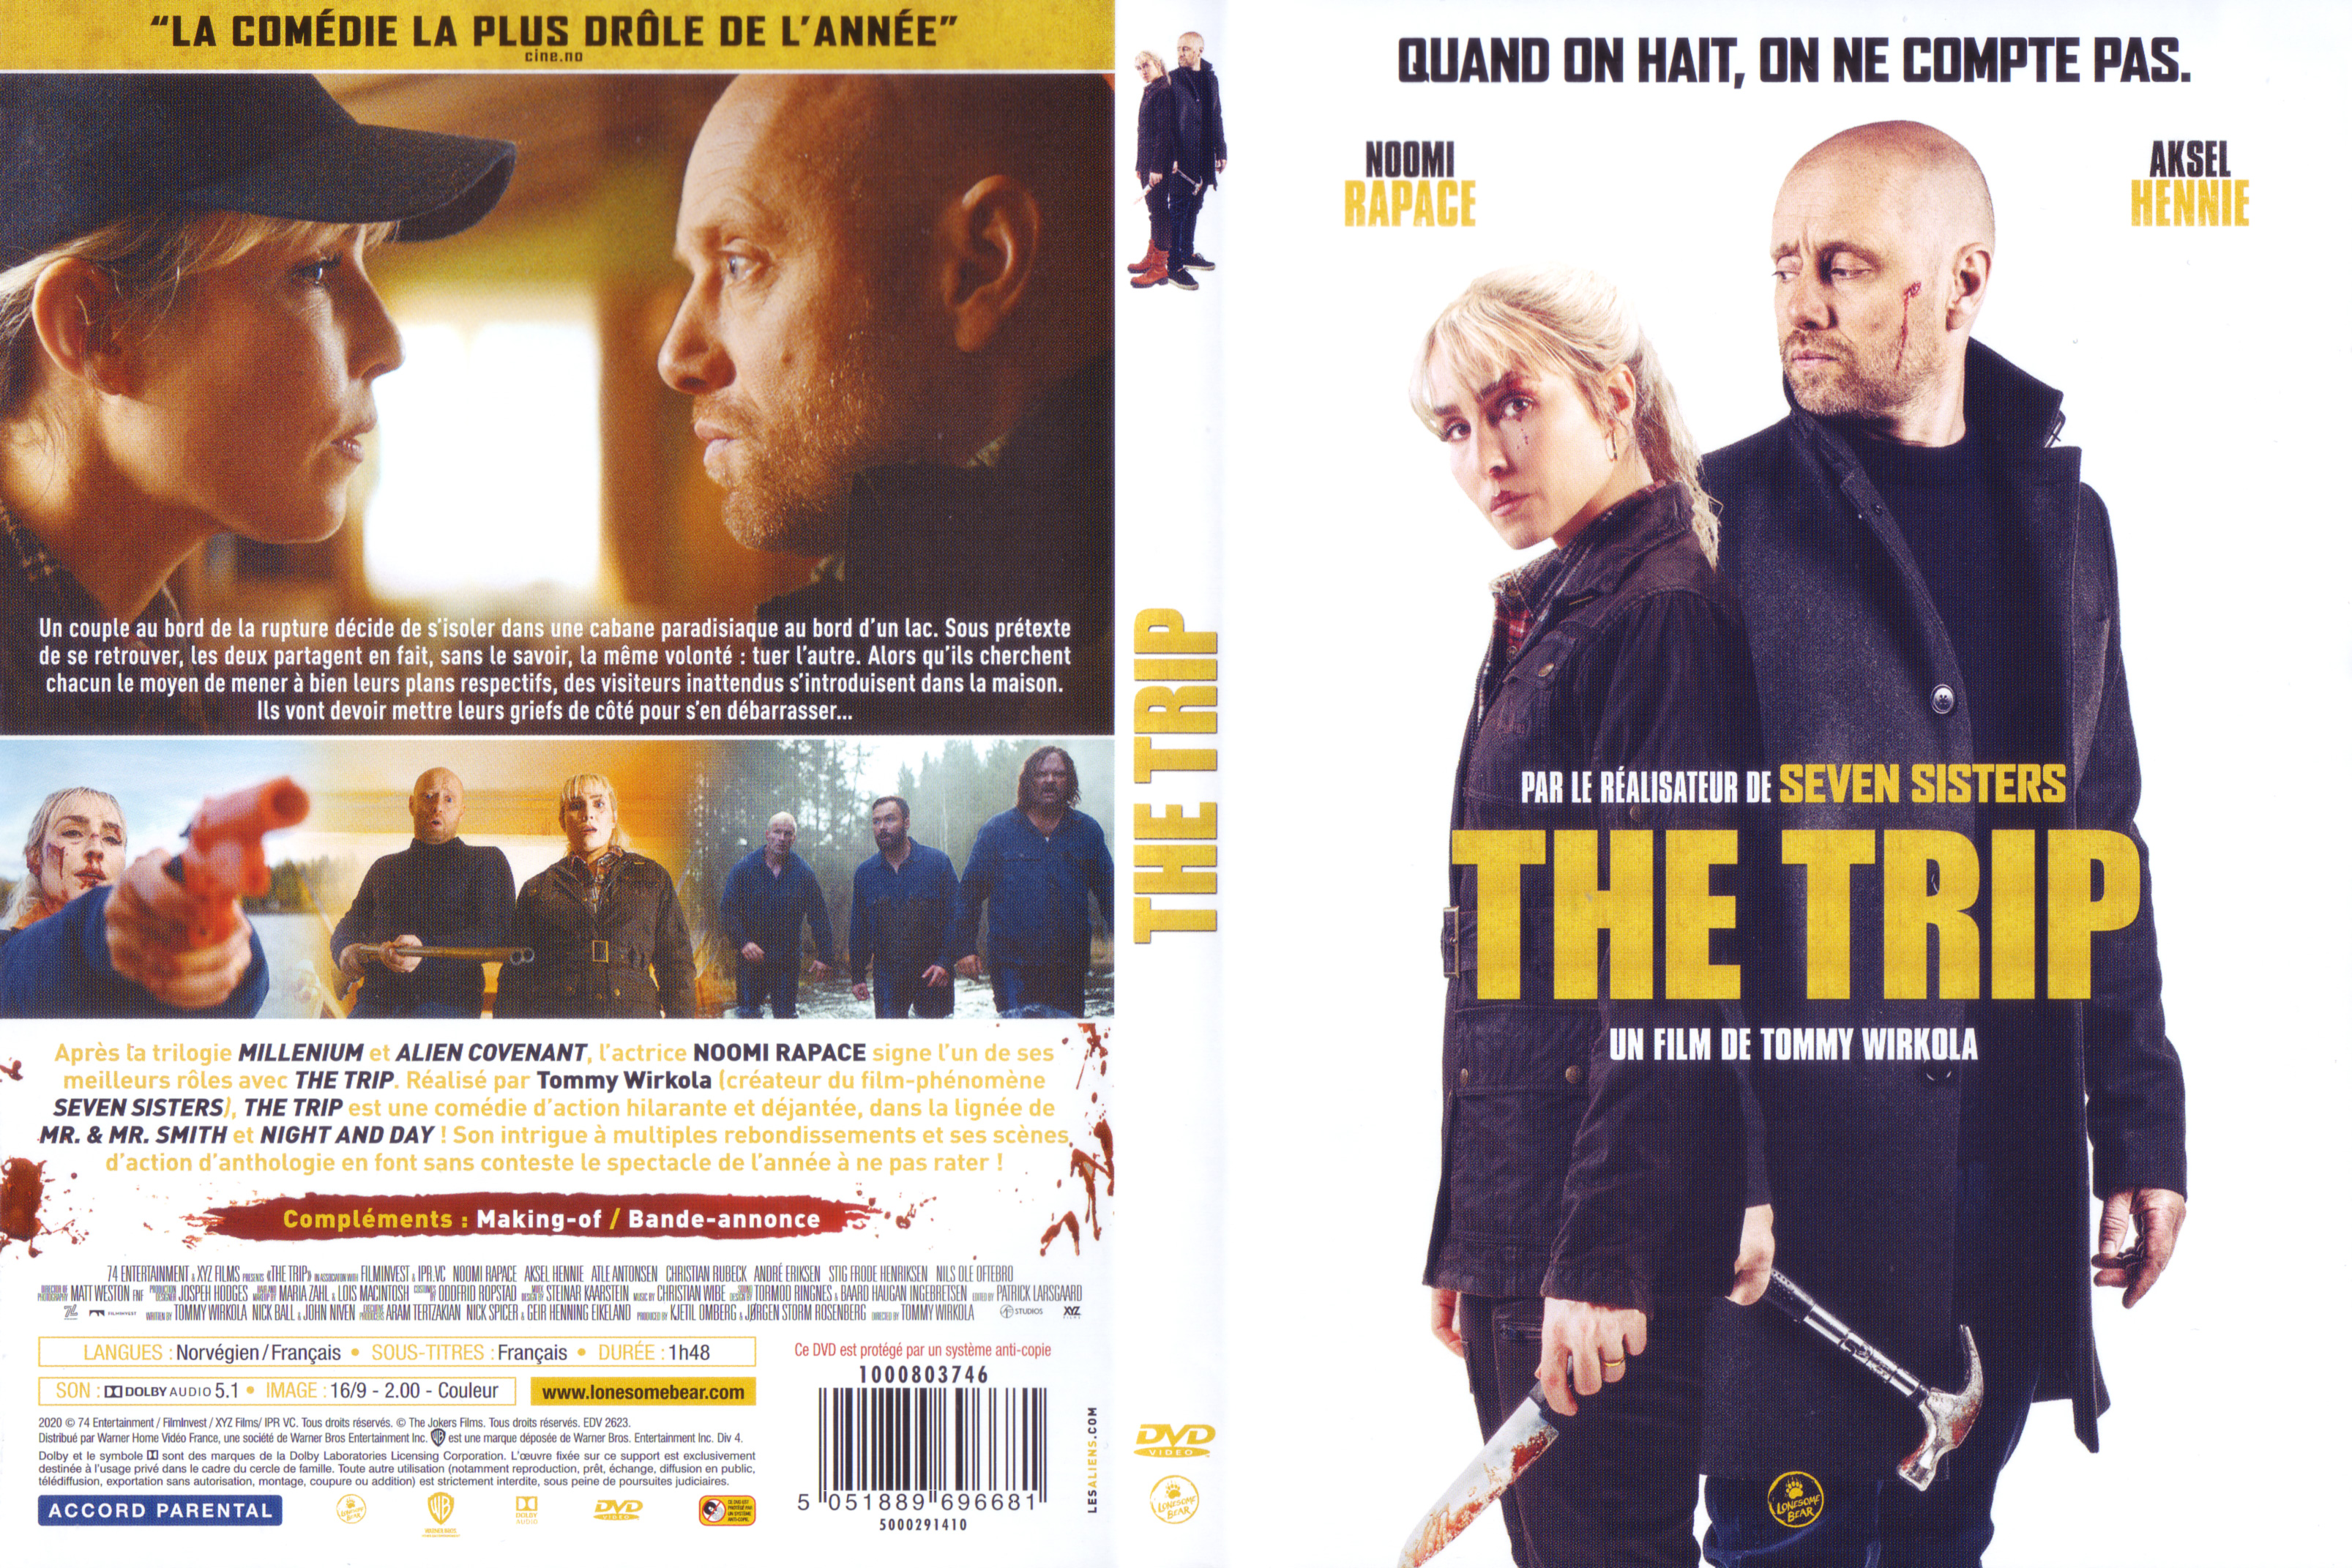 Jaquette DVD The trip (2021)